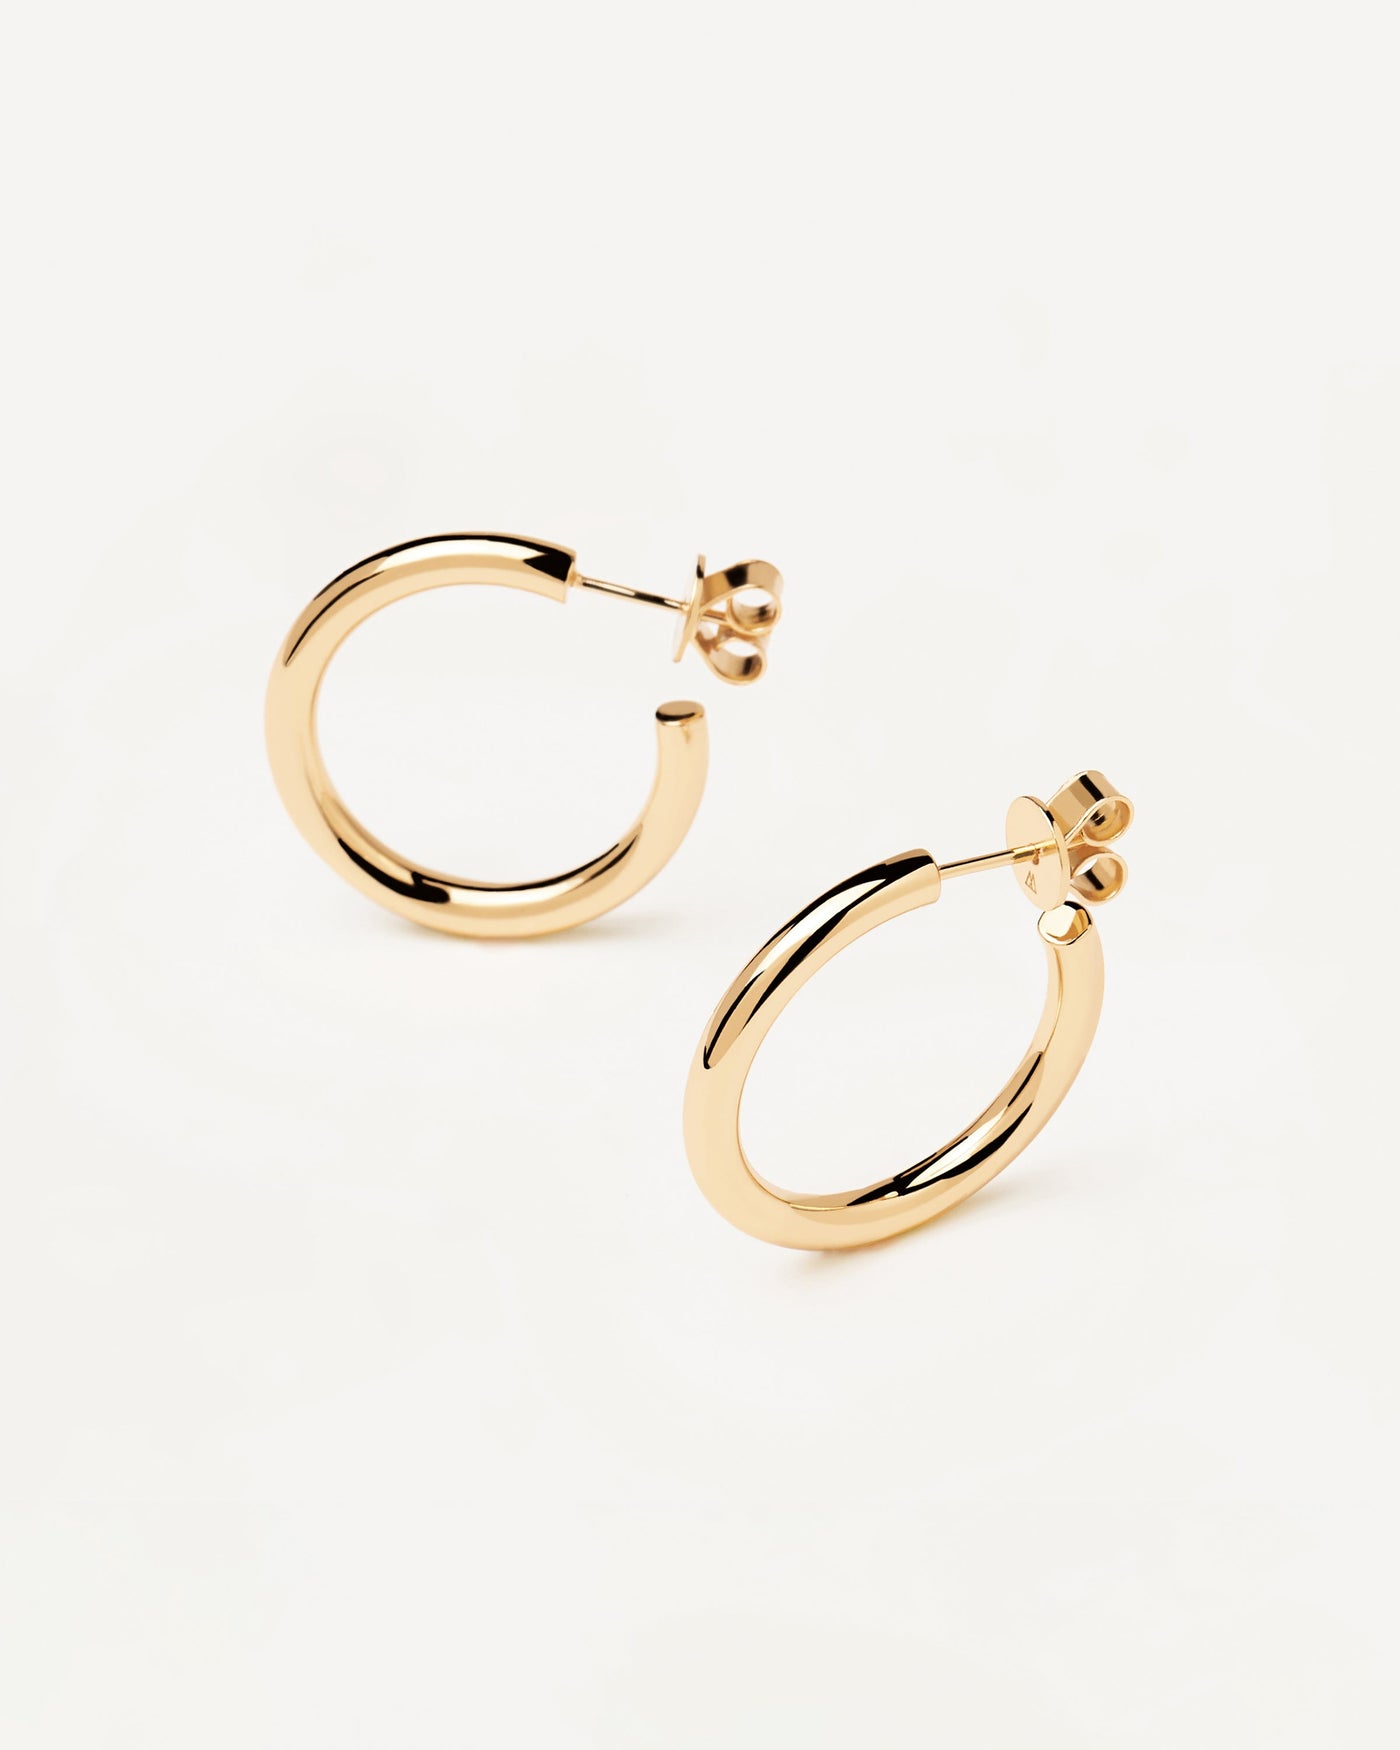 2023 Selection | Supreme Cloud Earrings. 18k gold plated sterling silver large c hoop earrings. Get the latest arrival from PDPAOLA. Place your order safely and get this Best Seller. Free Shipping.